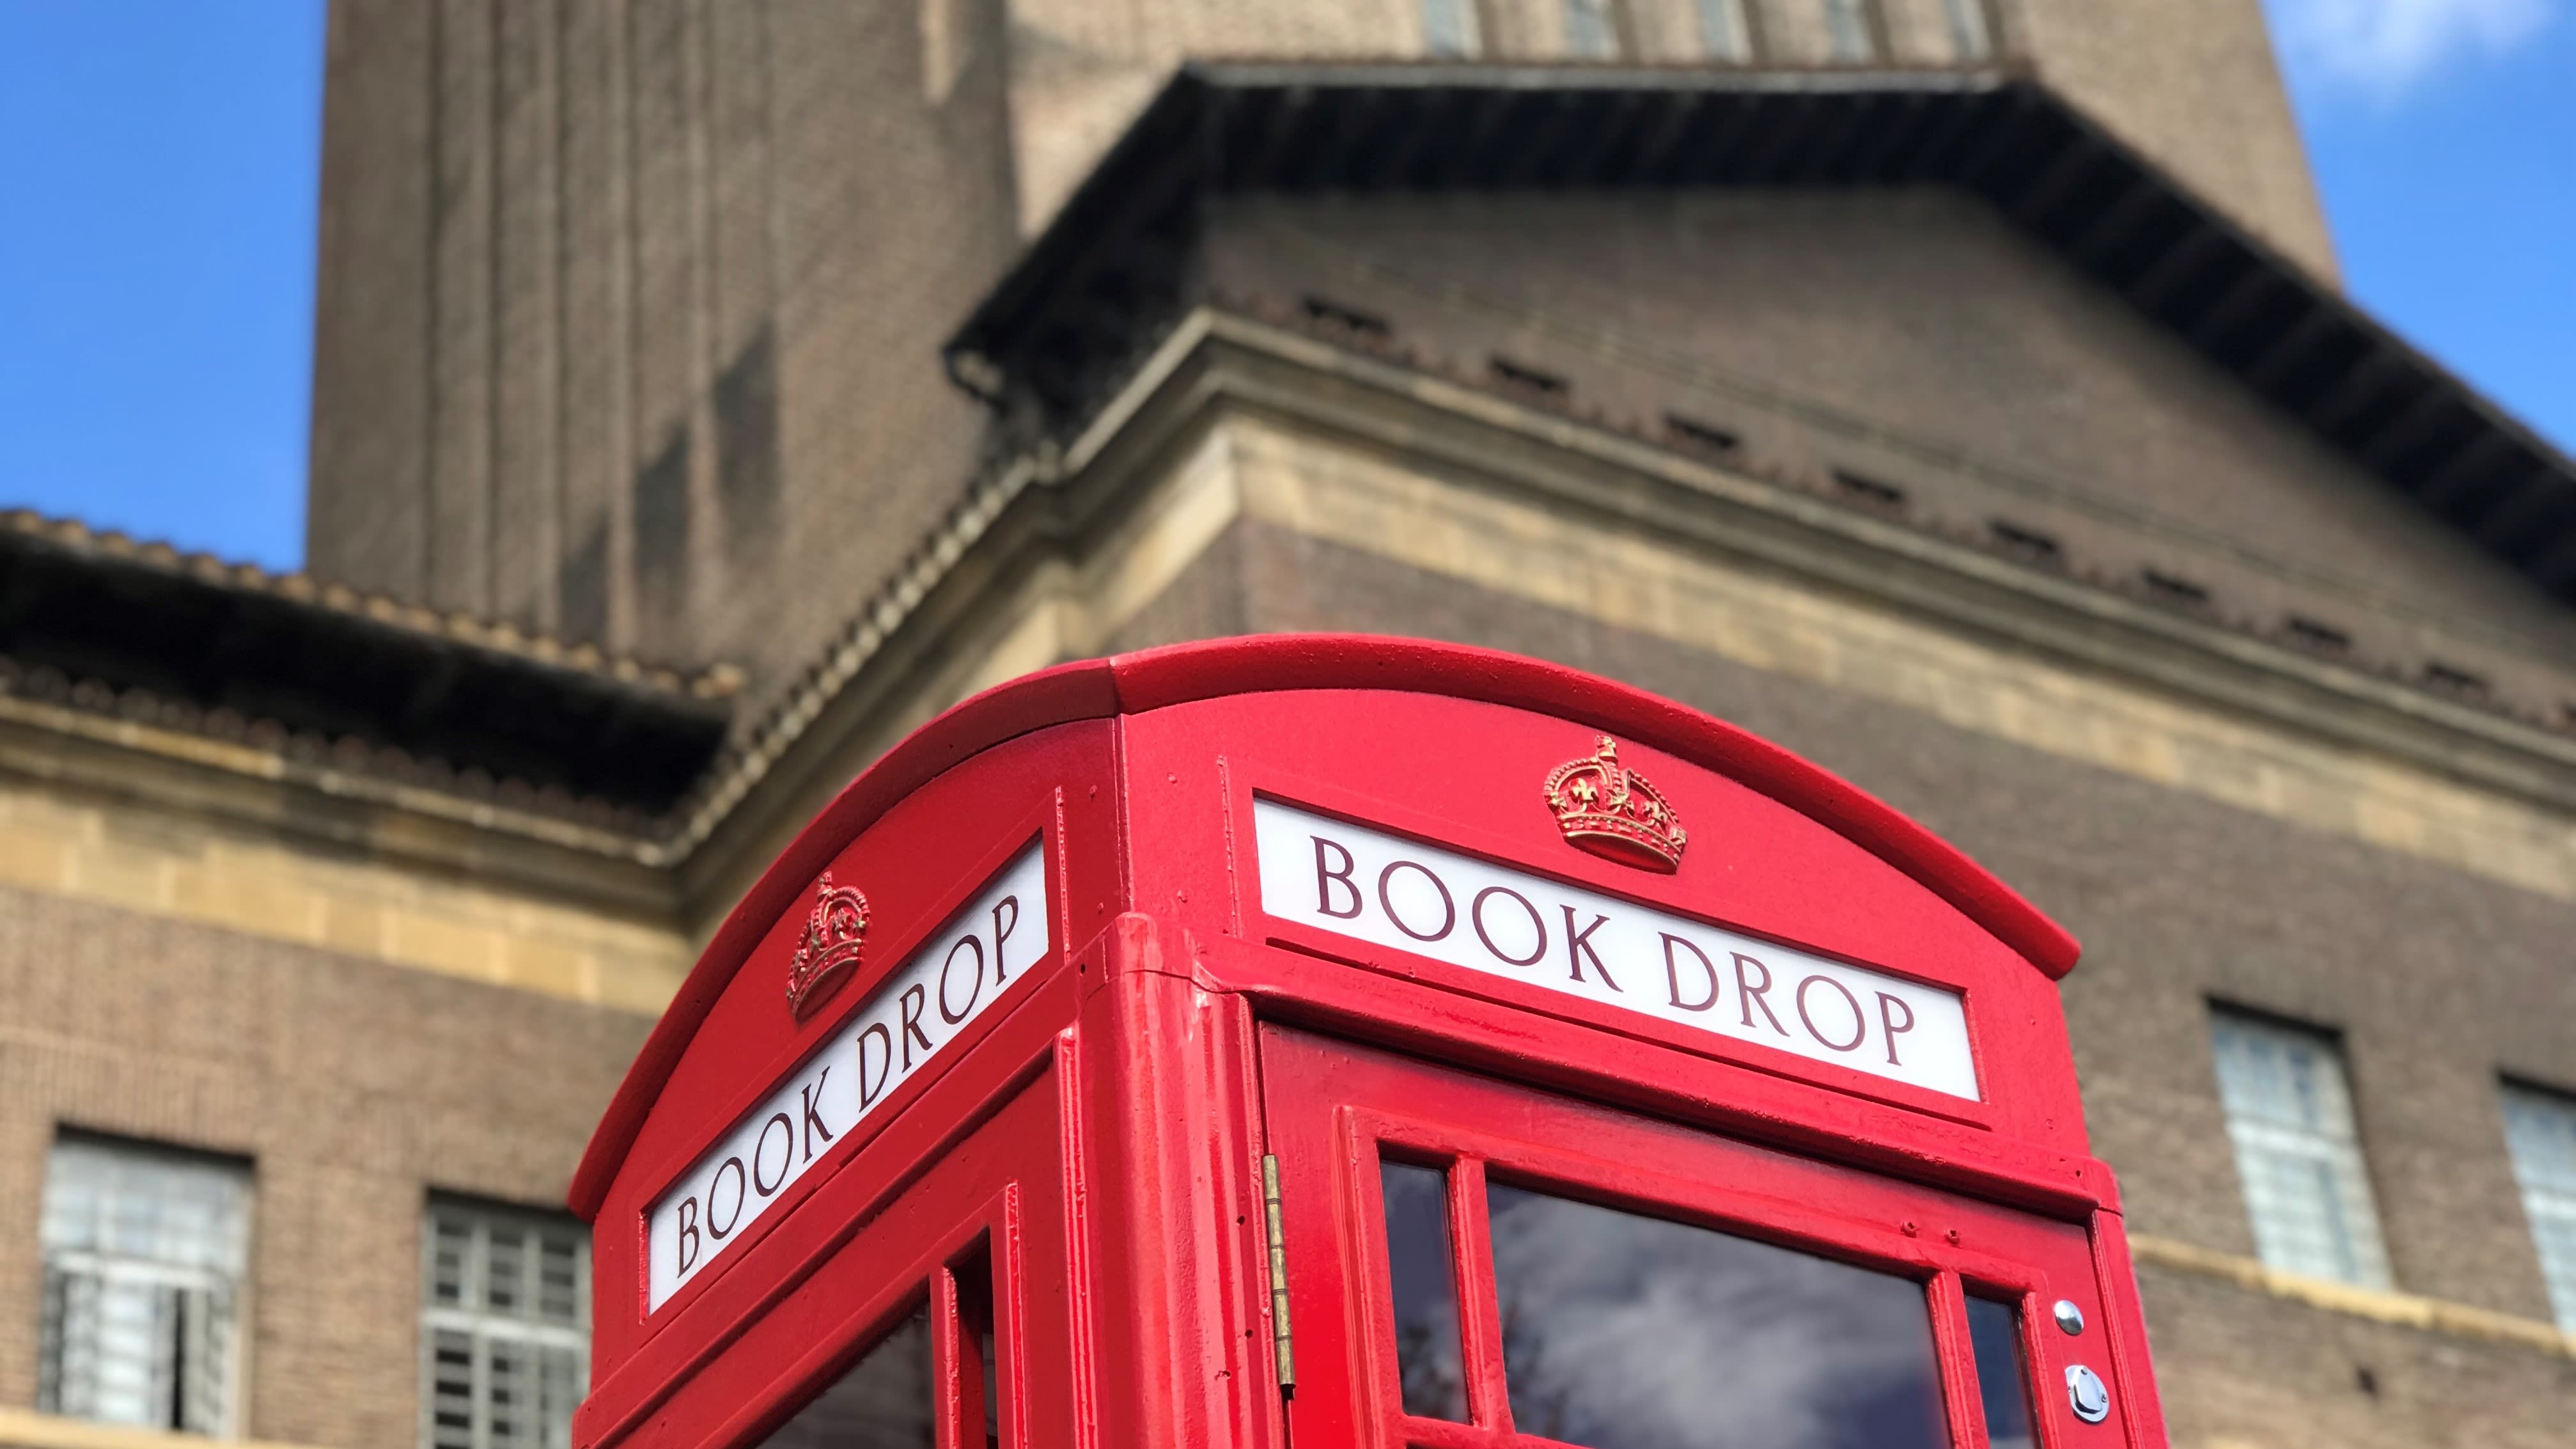 The Story of the Red Telephone Box on Campus